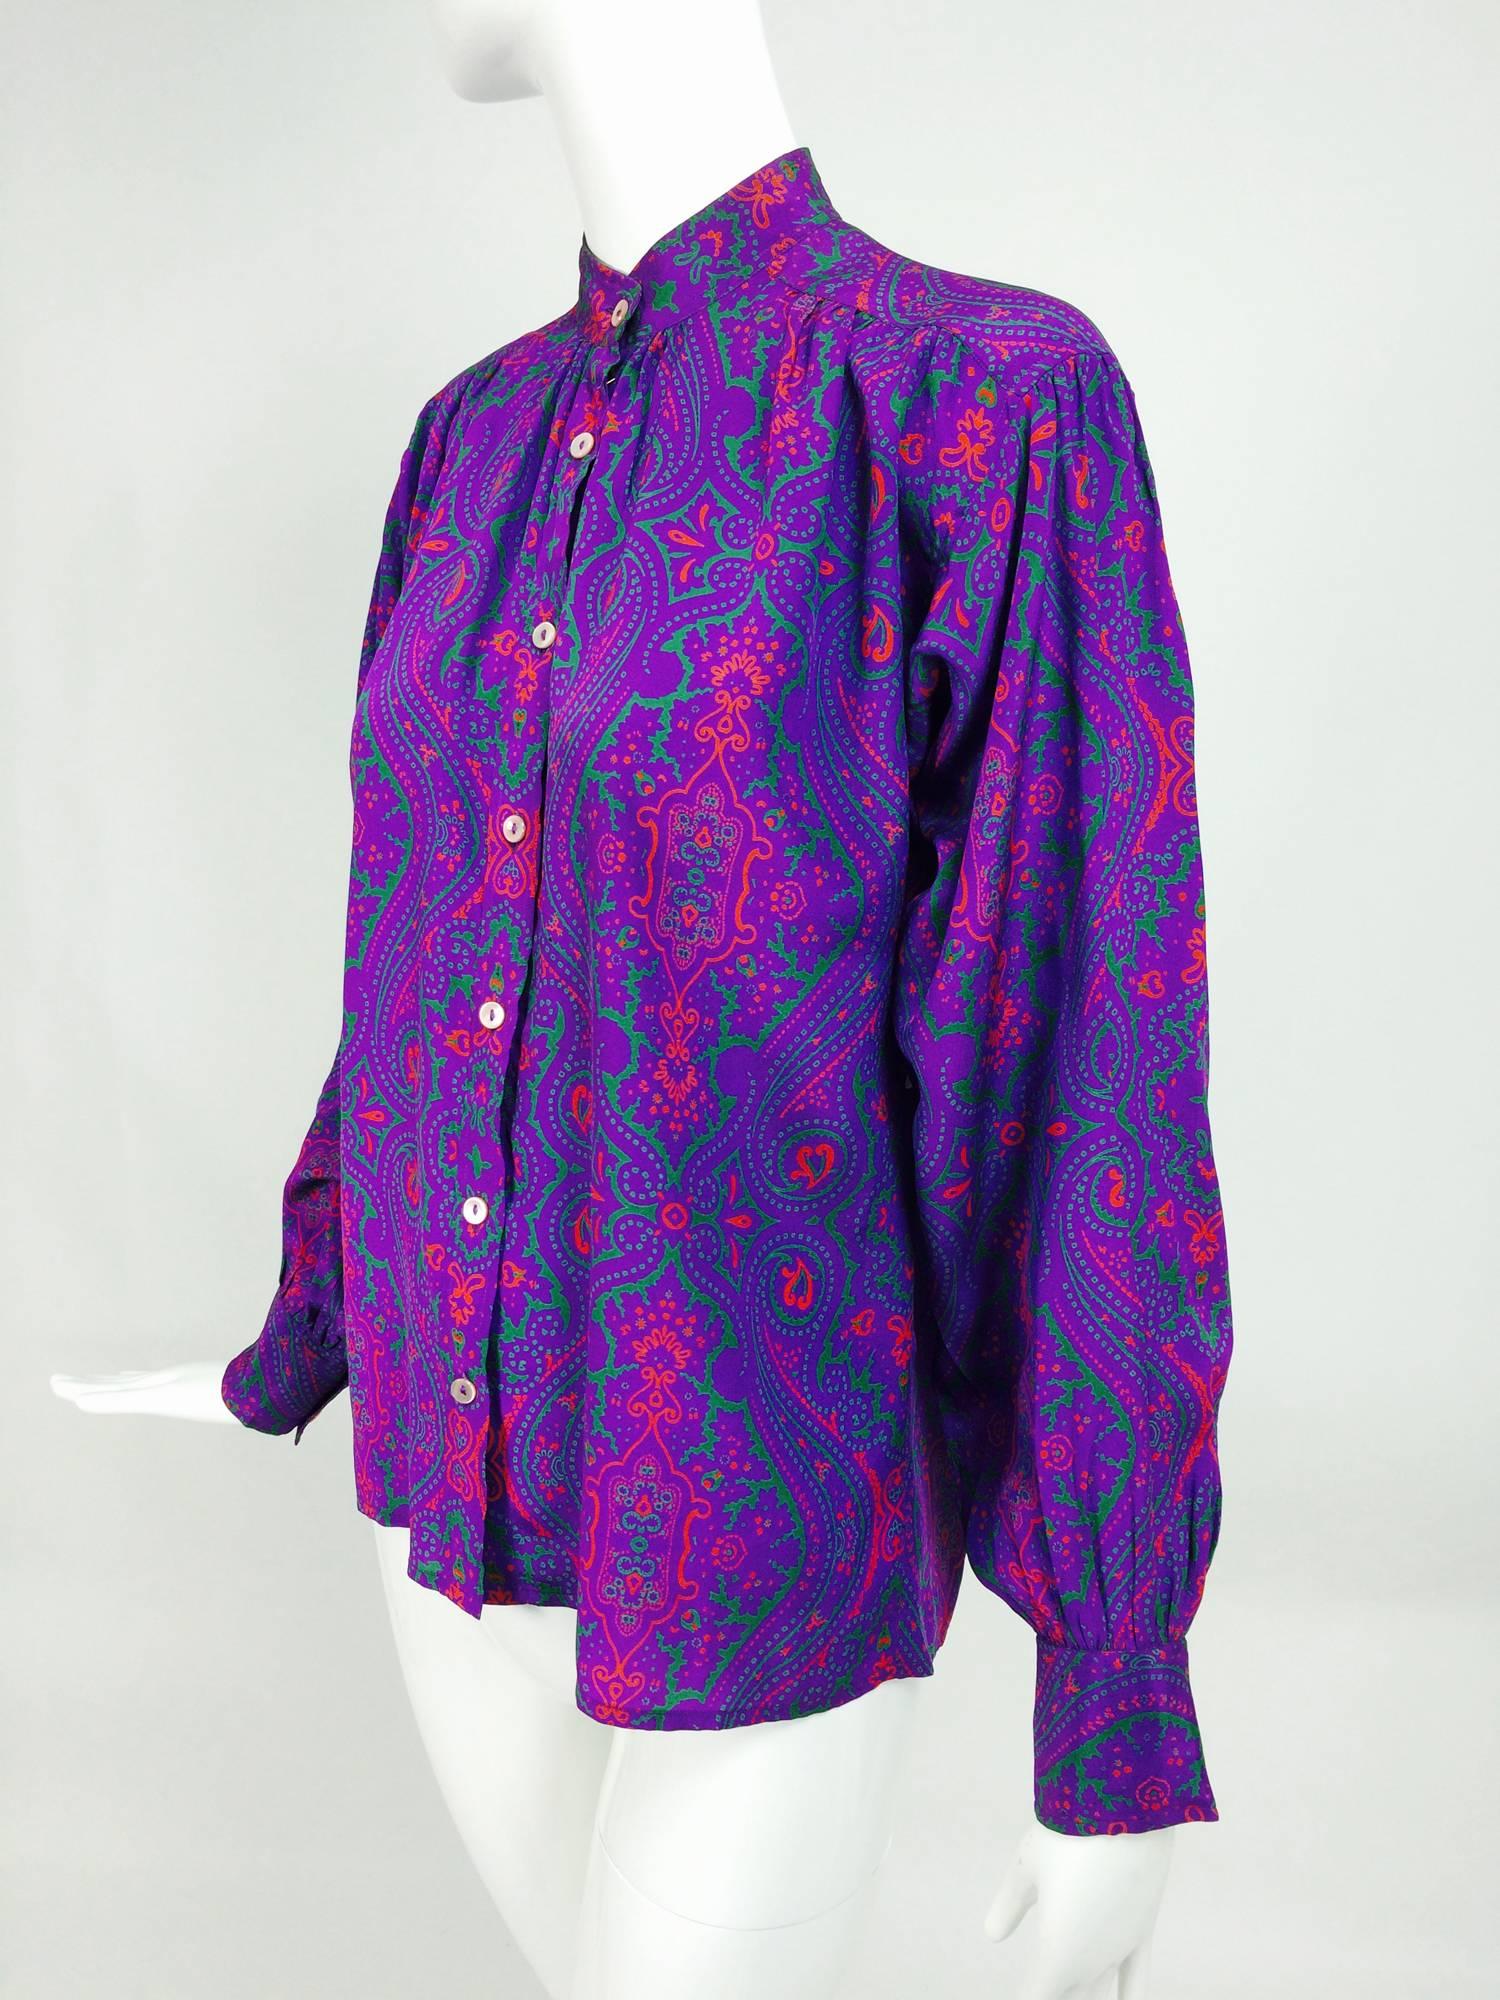 Yves Saint Laurent Moorish print silk blouse 1970s...Amazing print that looks like antique Moorish tiles...Purple & fuchsia...Banded collar button front blouse with long sleeves, yoke front and back and button cuffs...Marked size 38 fits like a